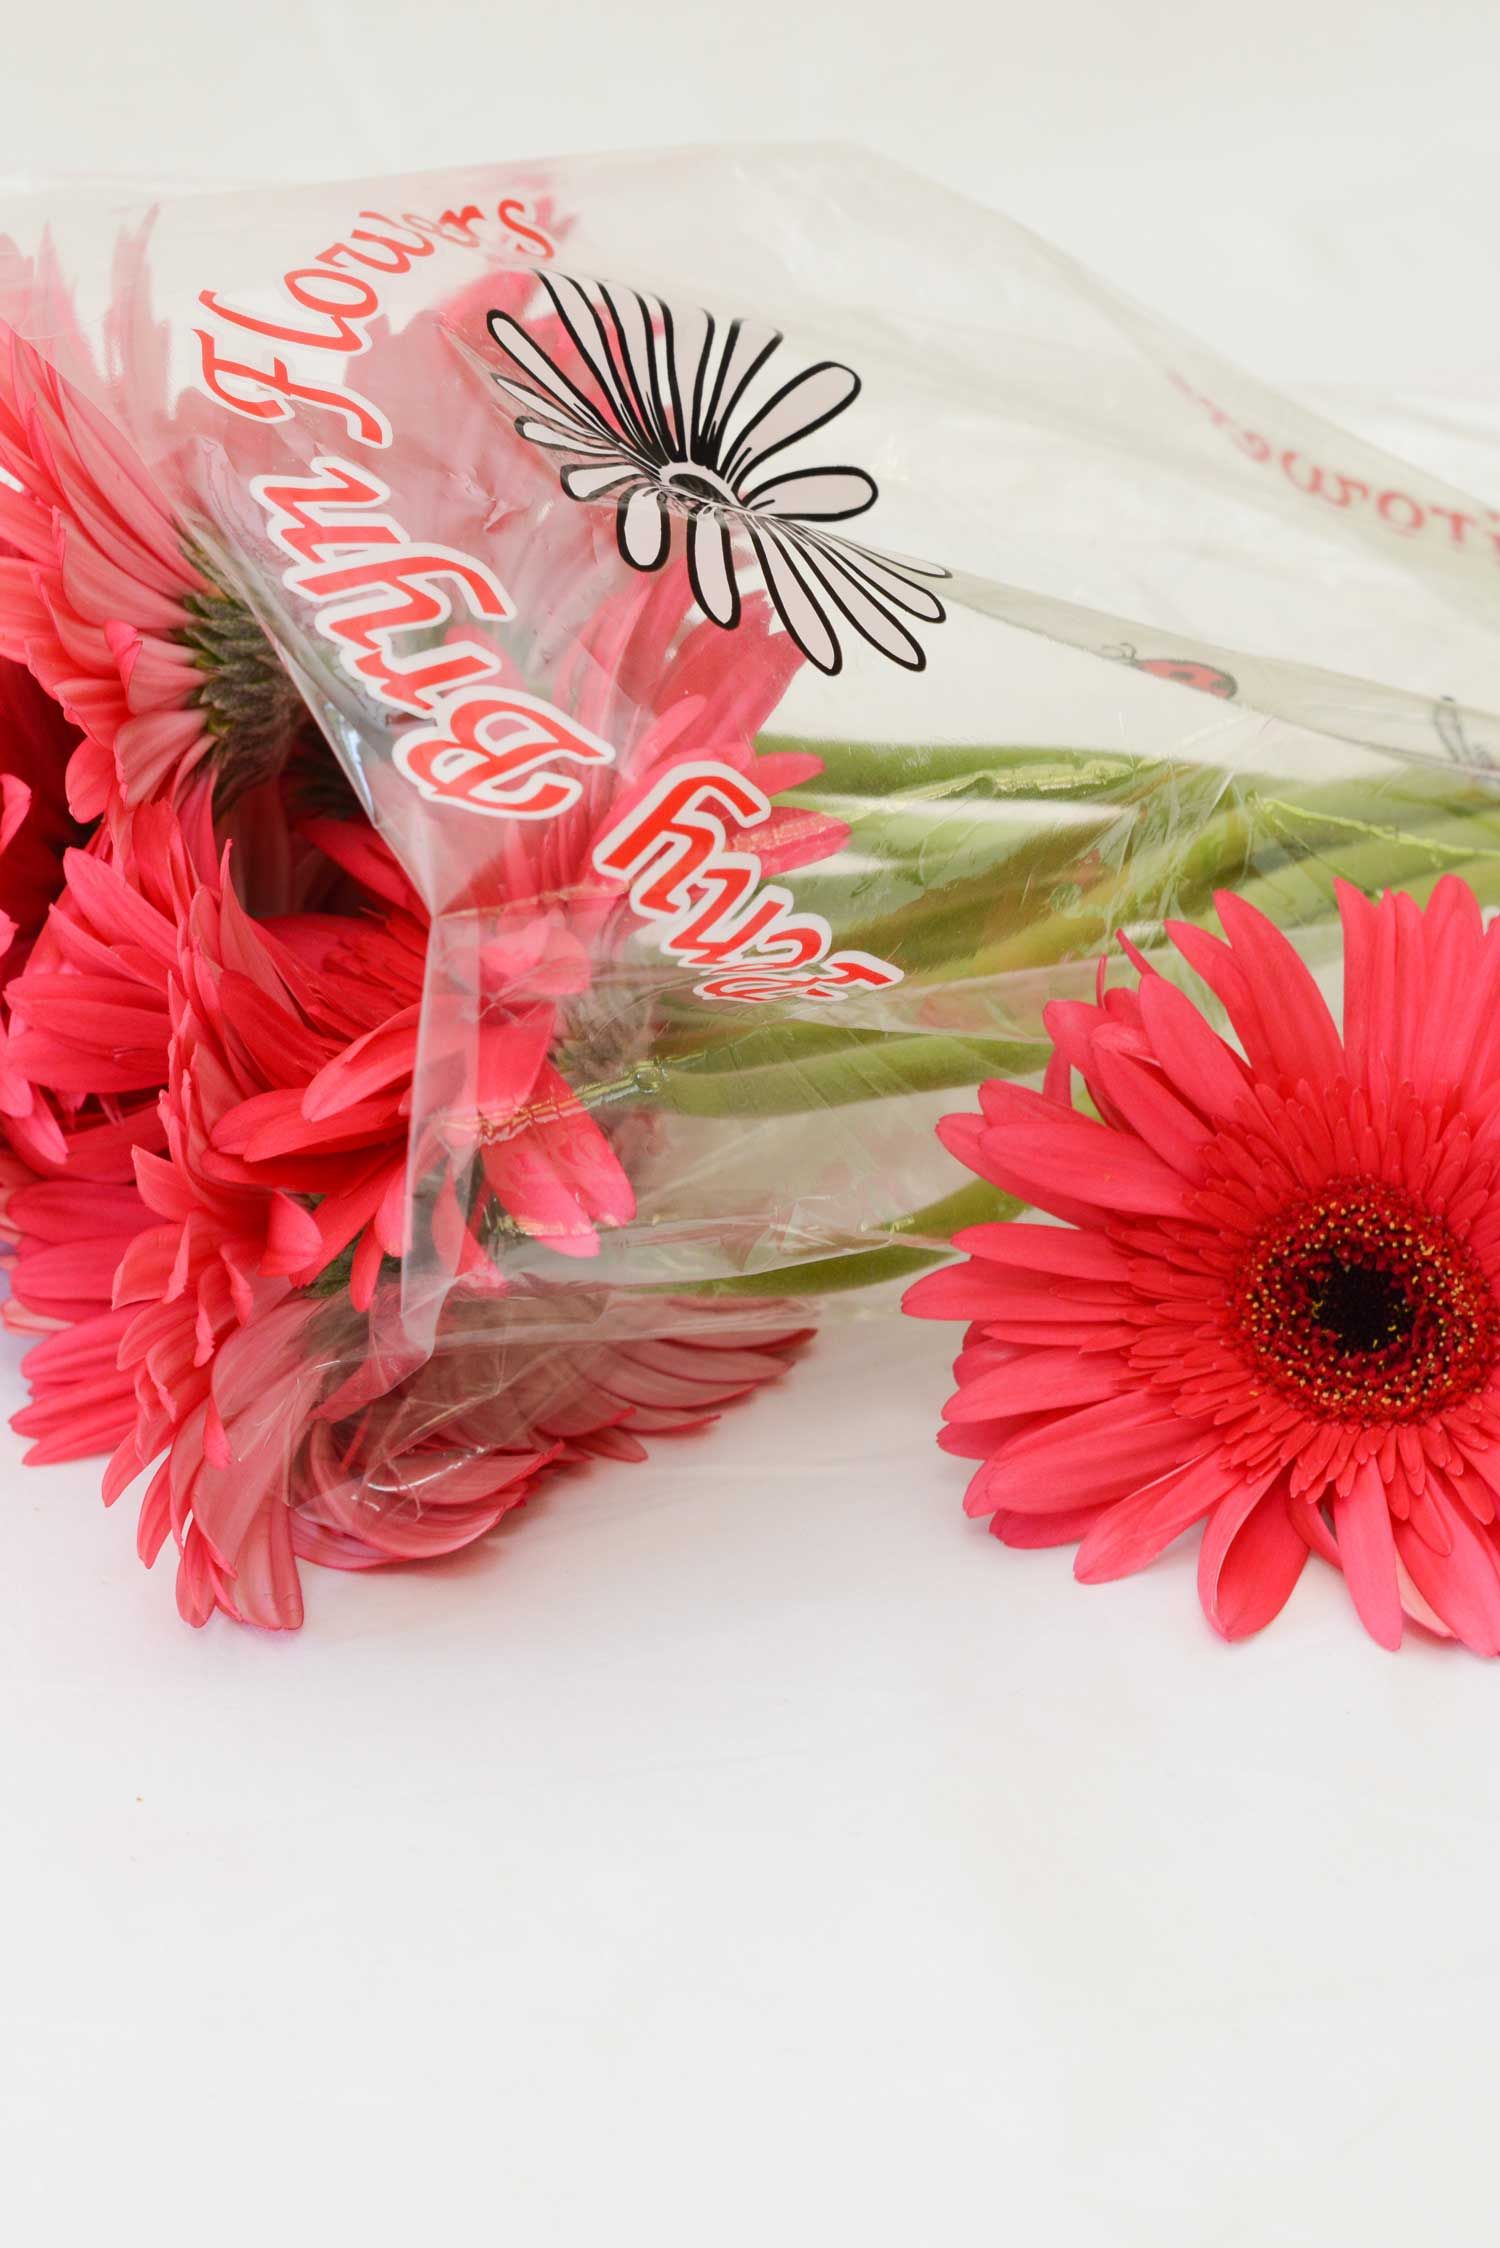 packaged bouquet of flowers